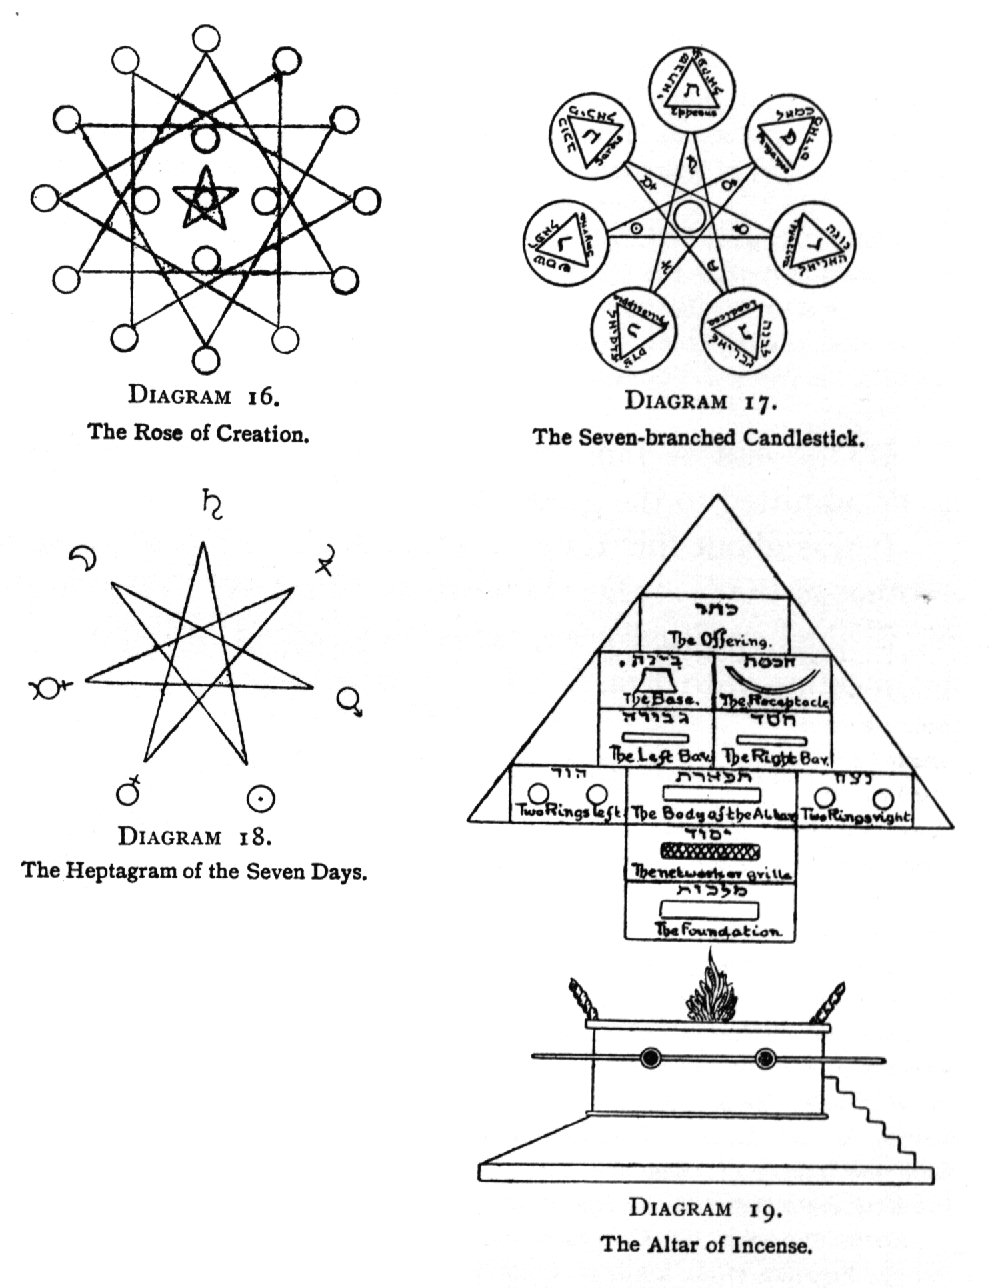 The Rose of Creation; The Seven-branched Candlestick; The Heptagram of the Seven Days; The Altar of Incense.